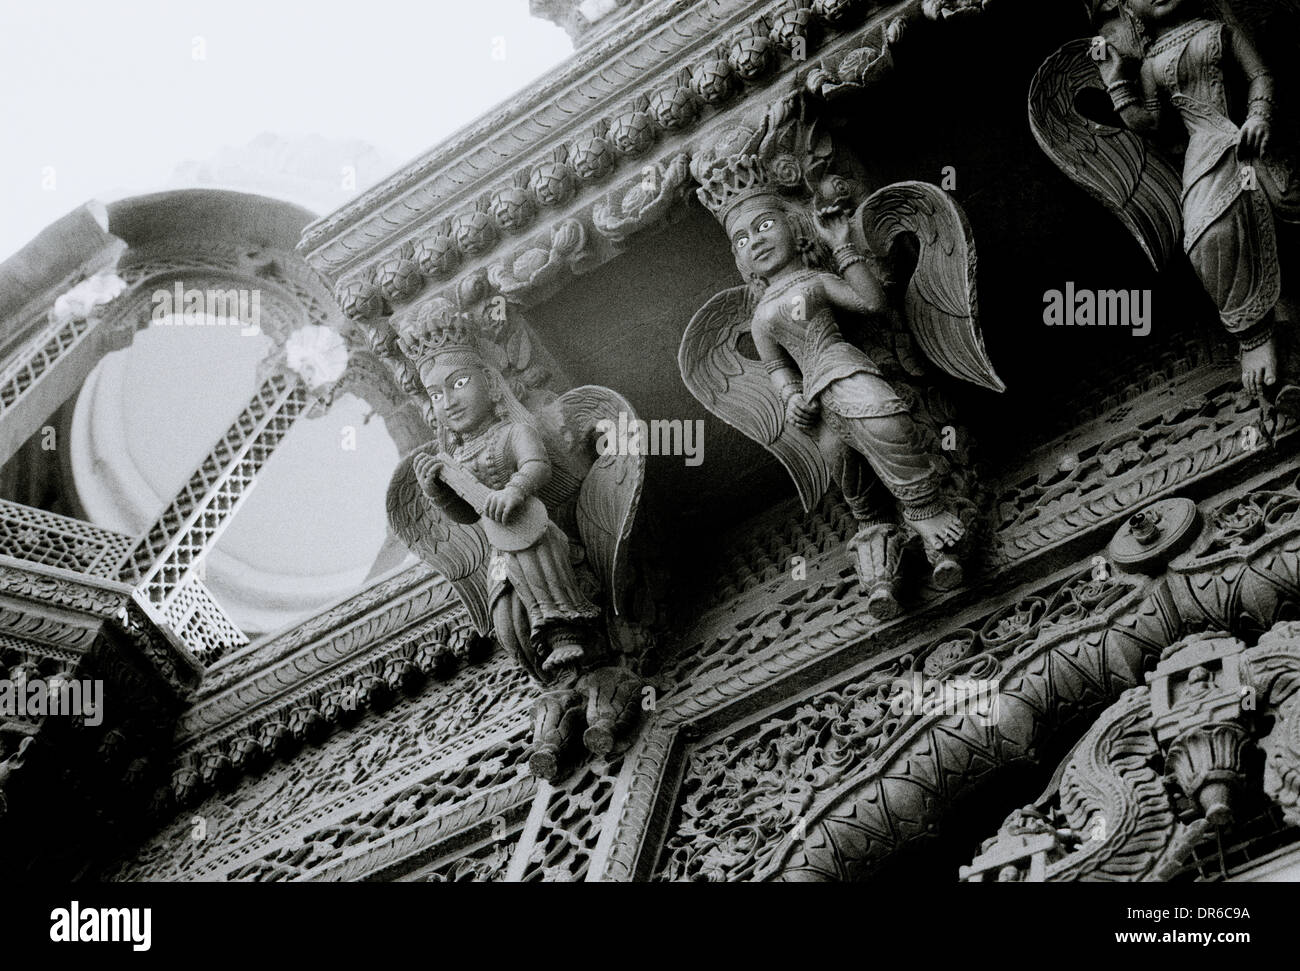 Sculpture art in a Hindu Temple in Blue City Jodhpur in Rajasthan in India in South Asia. Architecture Art History Indian Religious Religion Travel Stock Photo